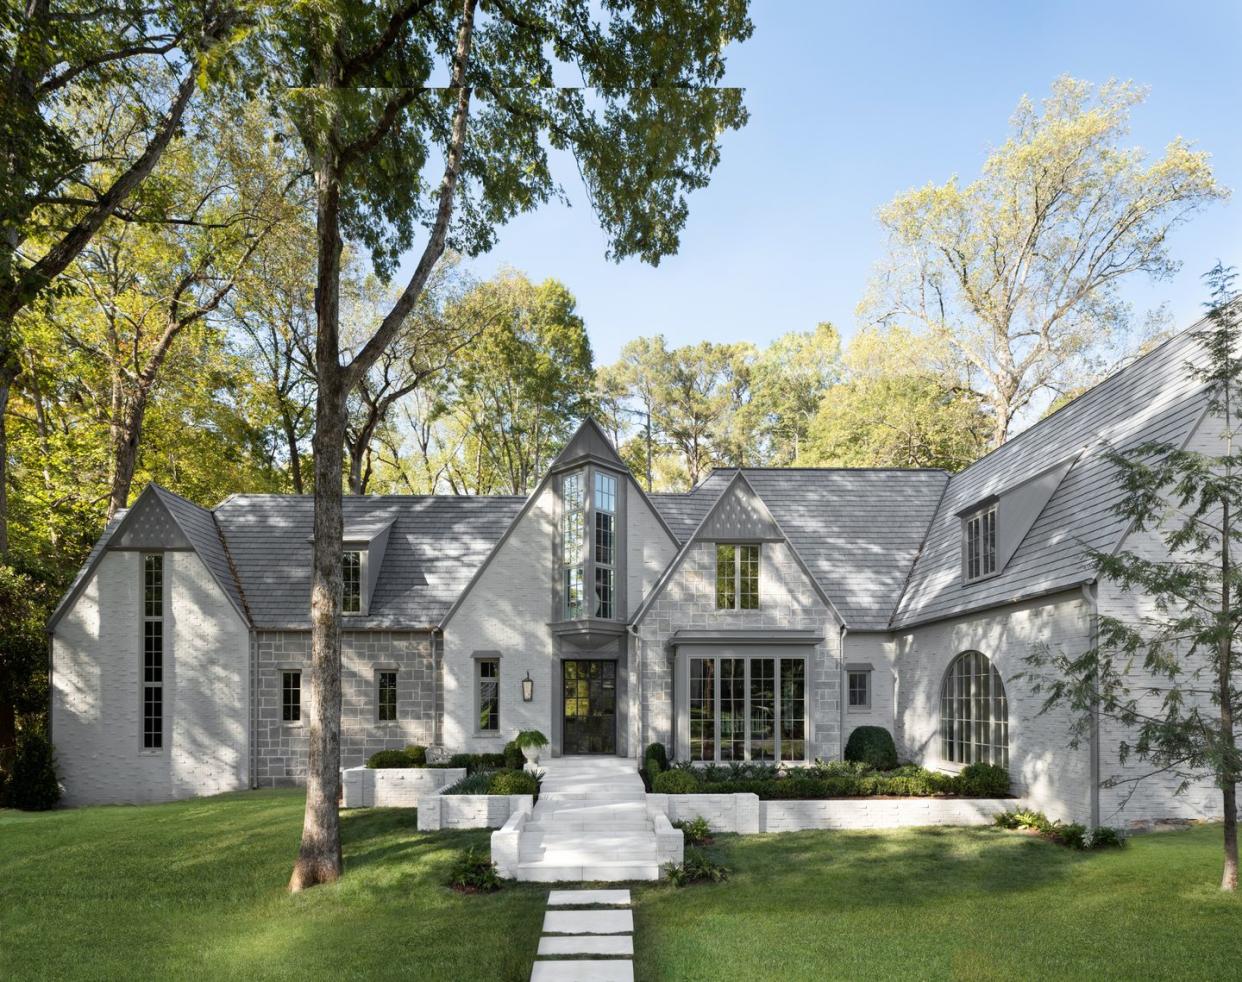 exterior the facade was updated with architectural windows from pella and paint in moles breath and purbeck stone by farrow ball a new pivoting steel door with a schlage smart lock grants guests access from afar 5th annual whole home